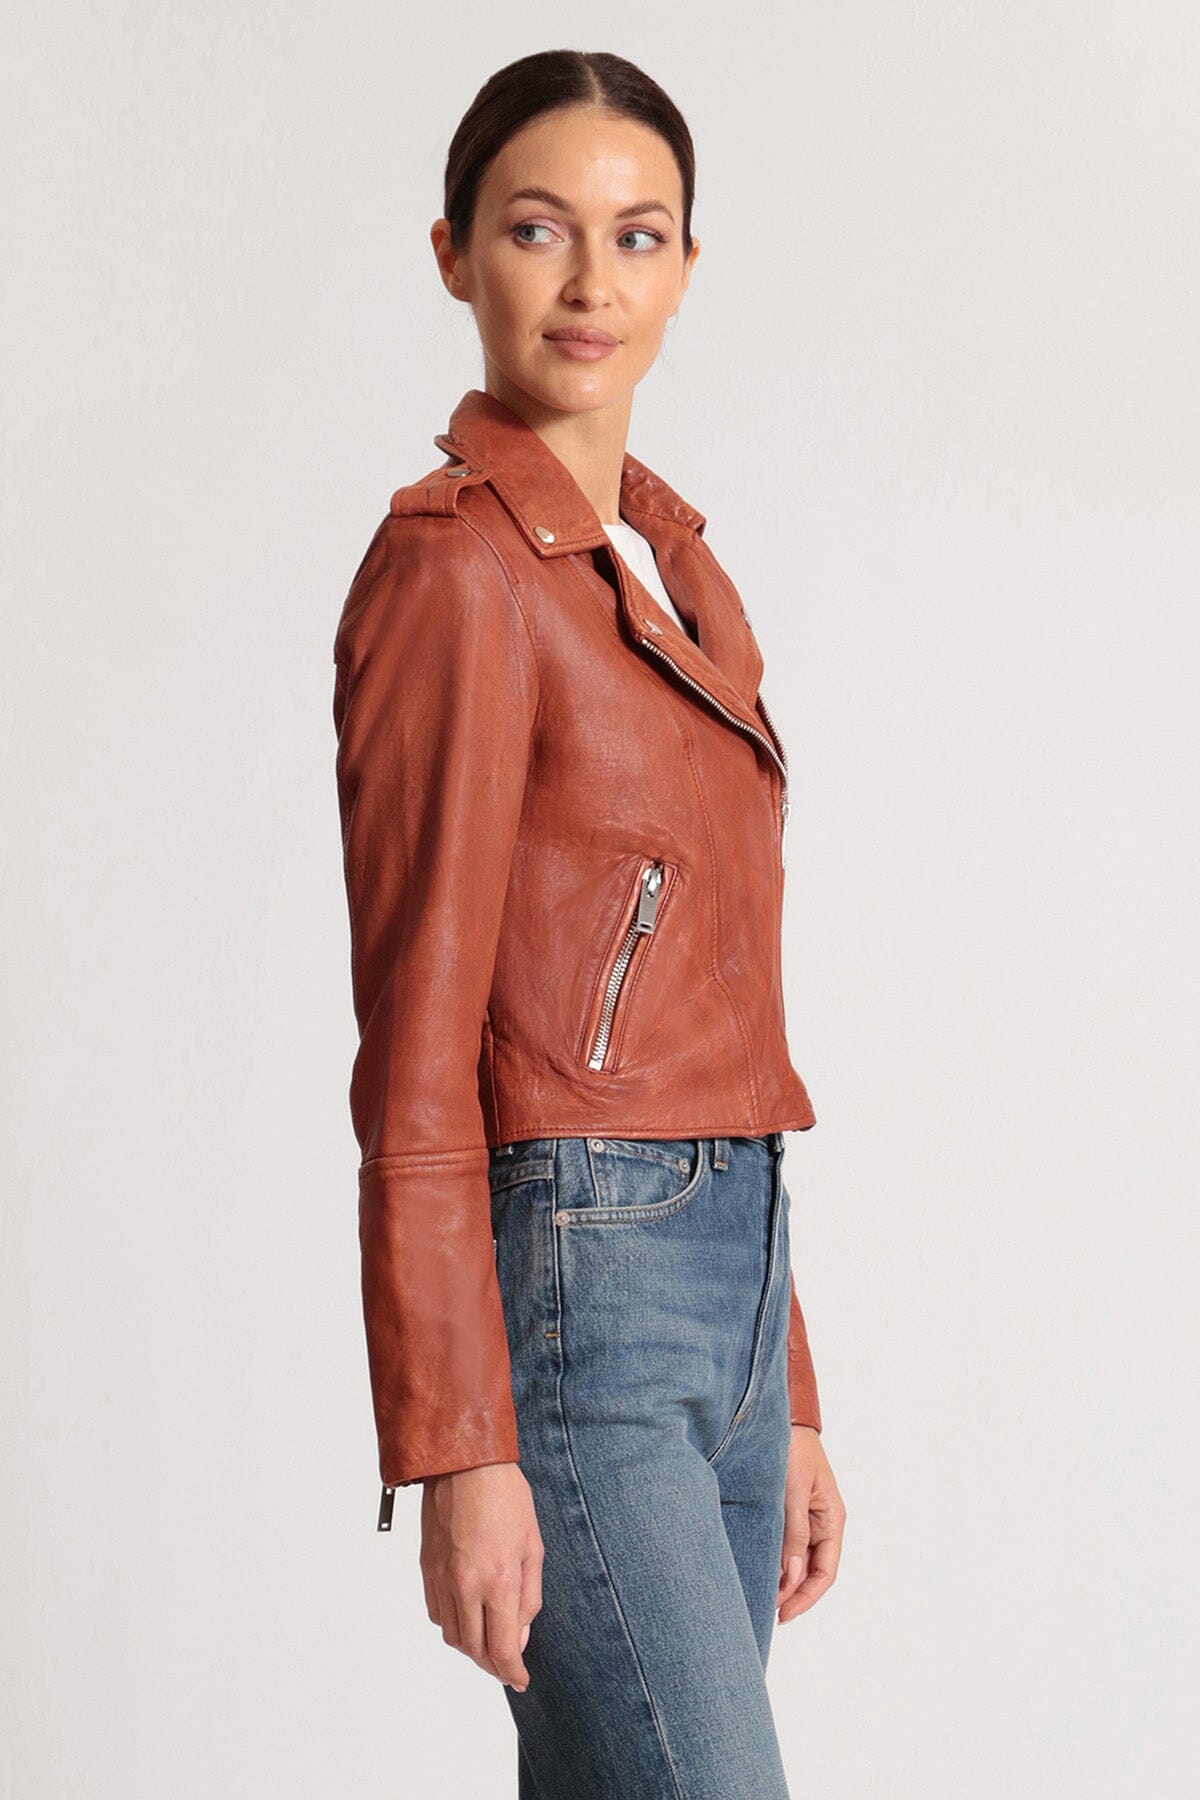 Red genuine leather cropped biker jacket coat - figure flattering casual to dressy jackets coats for women's Fall fashion